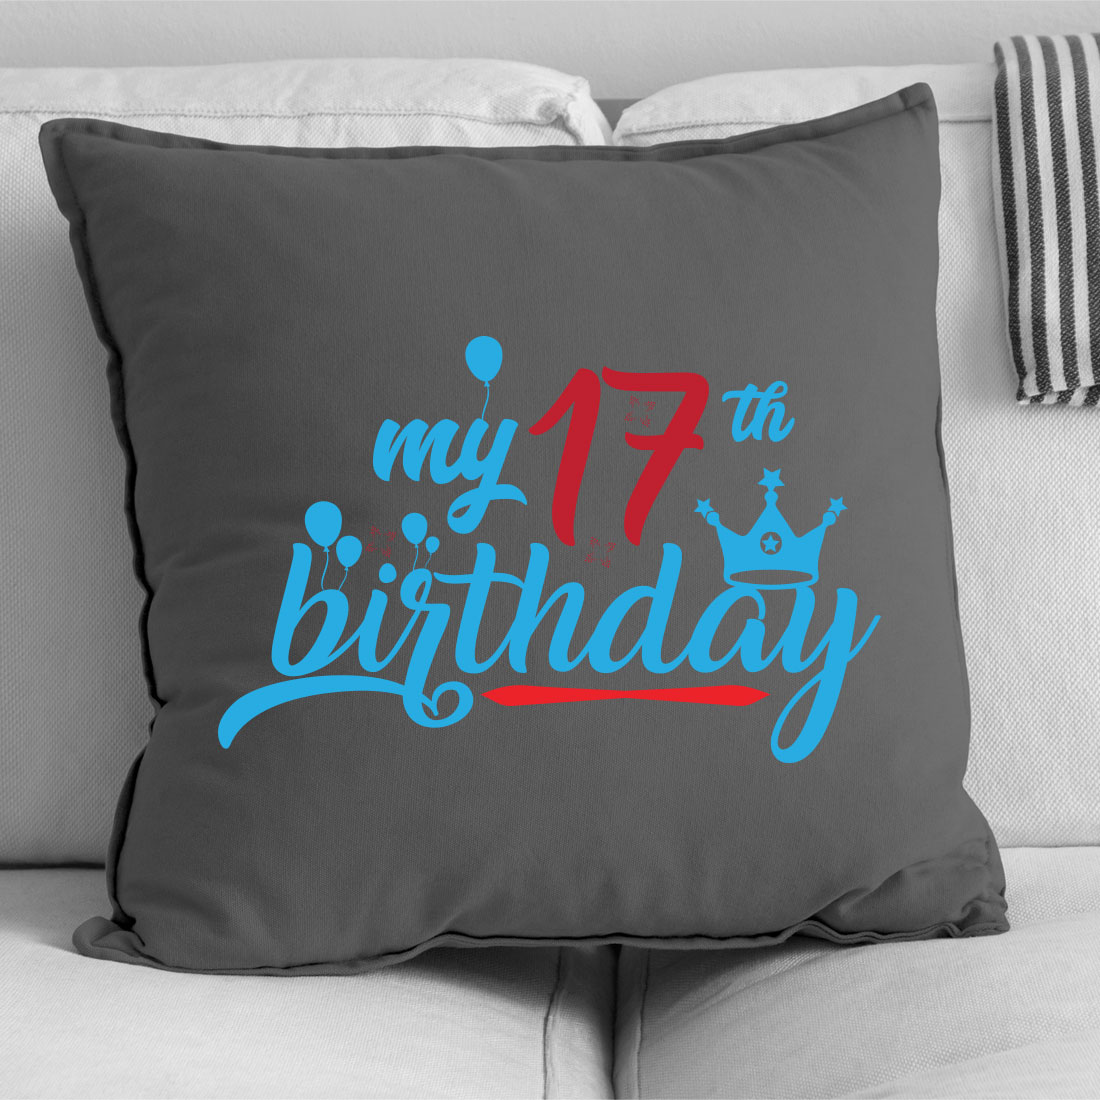 Pillow that says my 17th birthday on it.